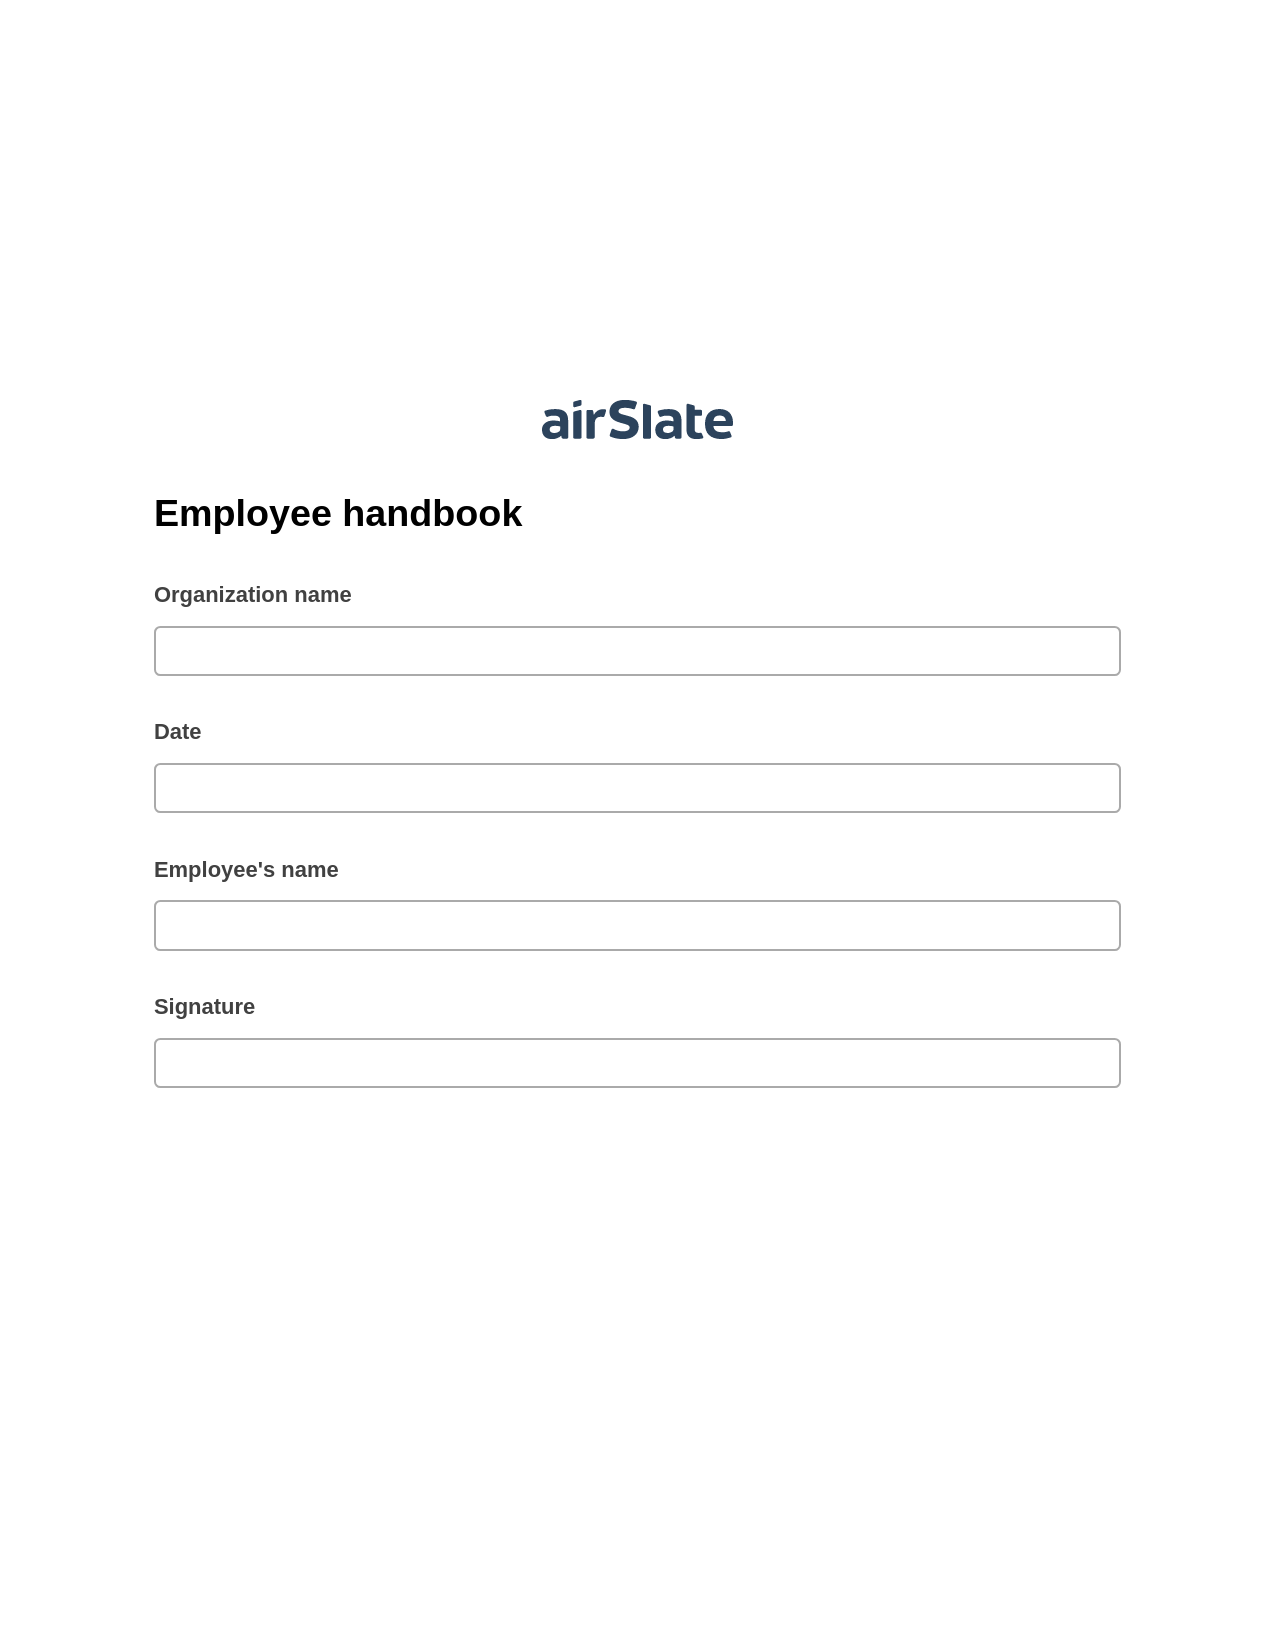 Employee handbook Pre-fill Dropdowns from Google Sheet Bot, Lock the slate bot, Export to NetSuite Record Bot